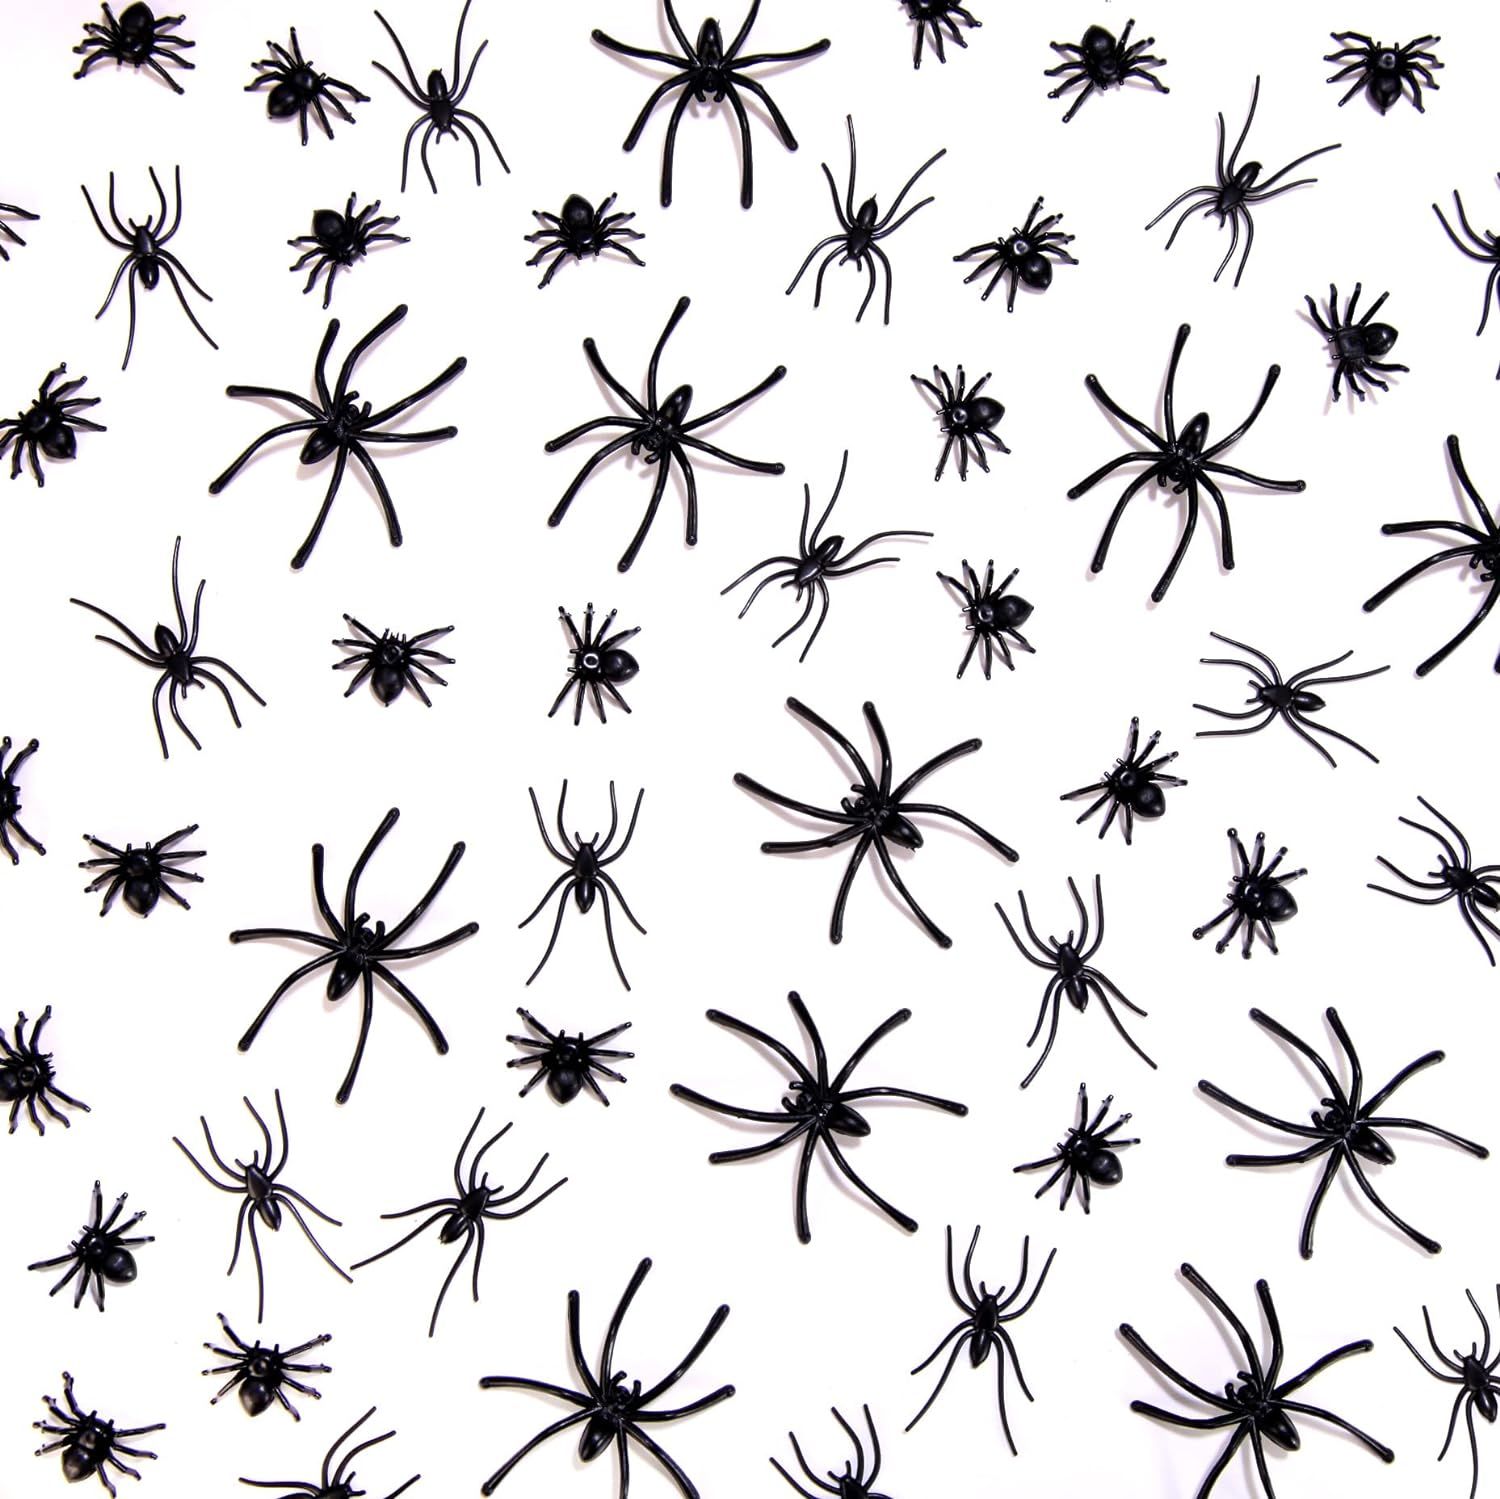 JIALWEN 120 Pieces Realistic Plastic Spiders 3 Sizes Small Spider Toys Black Fake Spiders Hallowe... | Amazon (US)